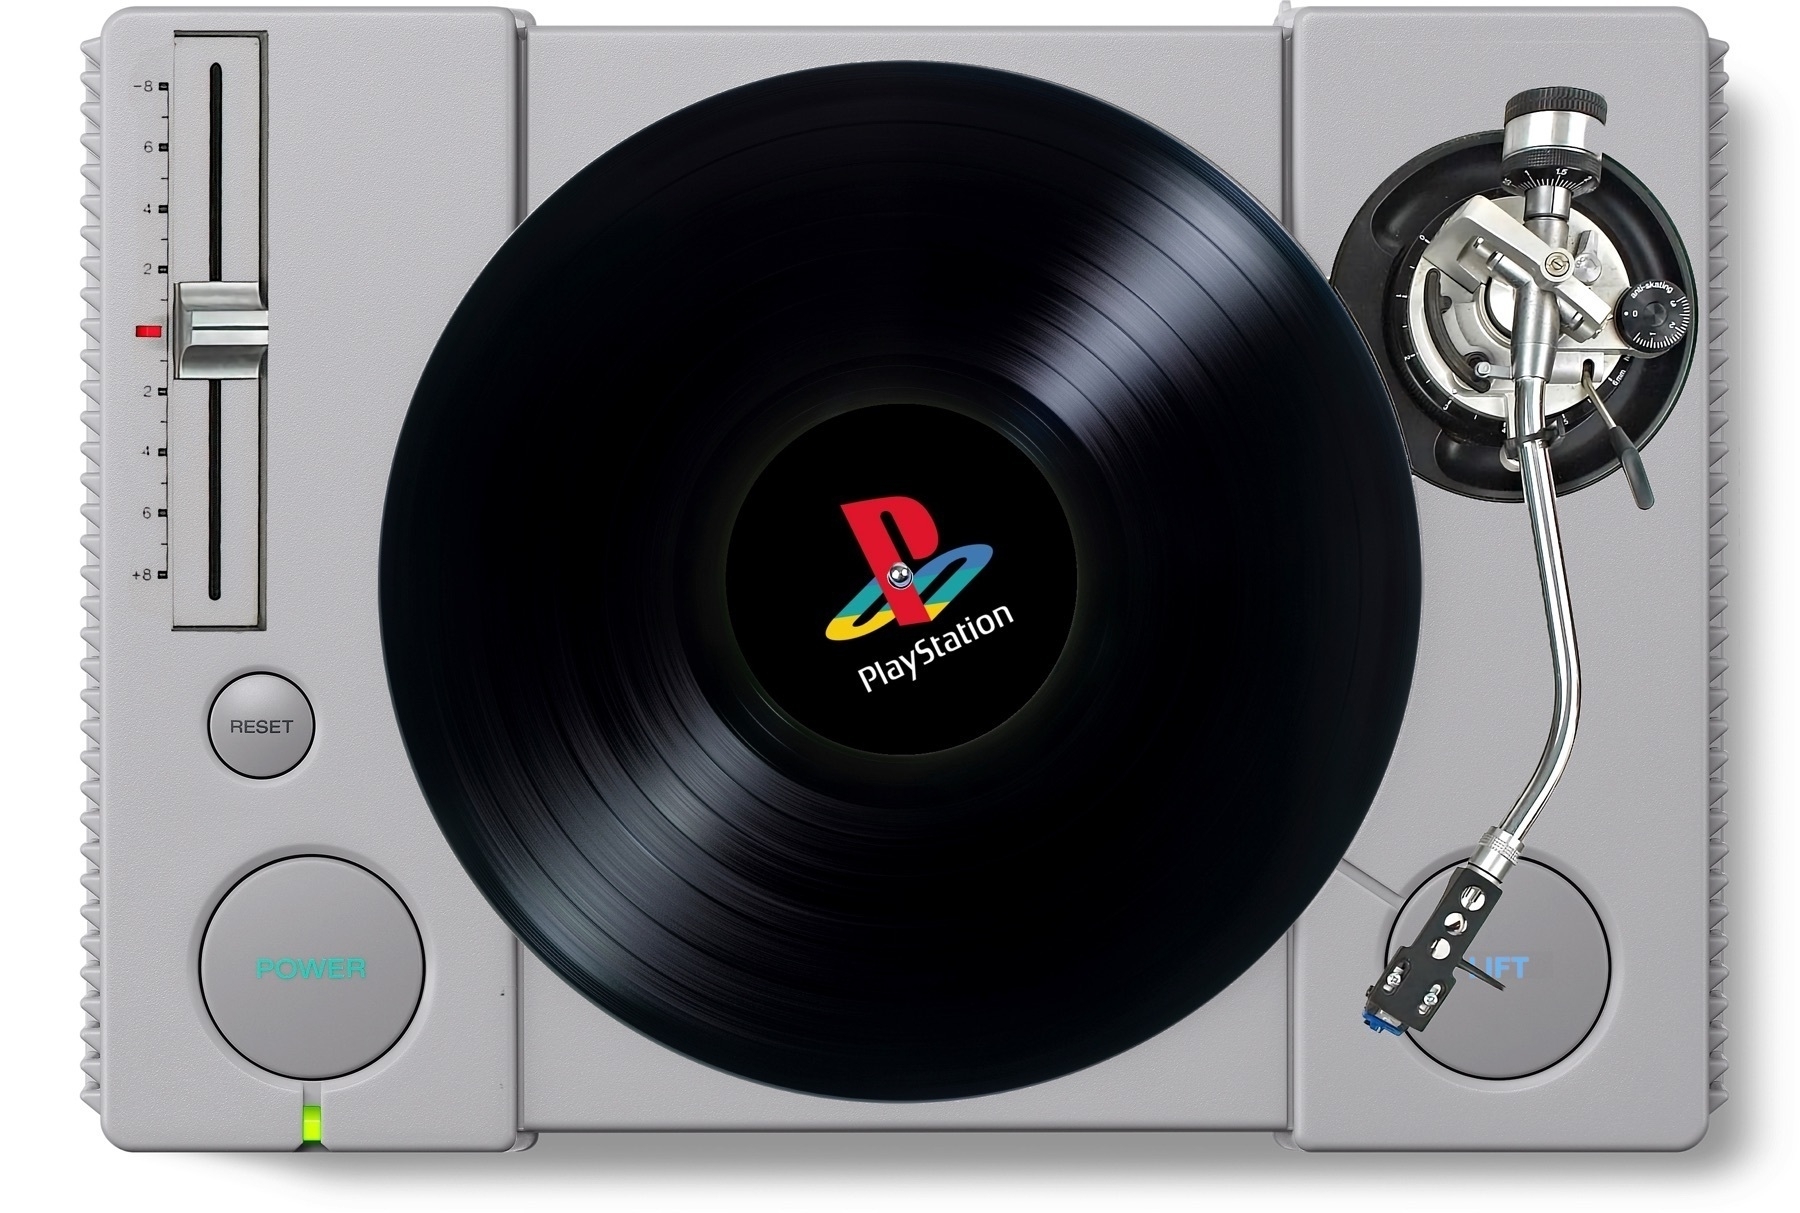 PlayStation Classic for Vinyl